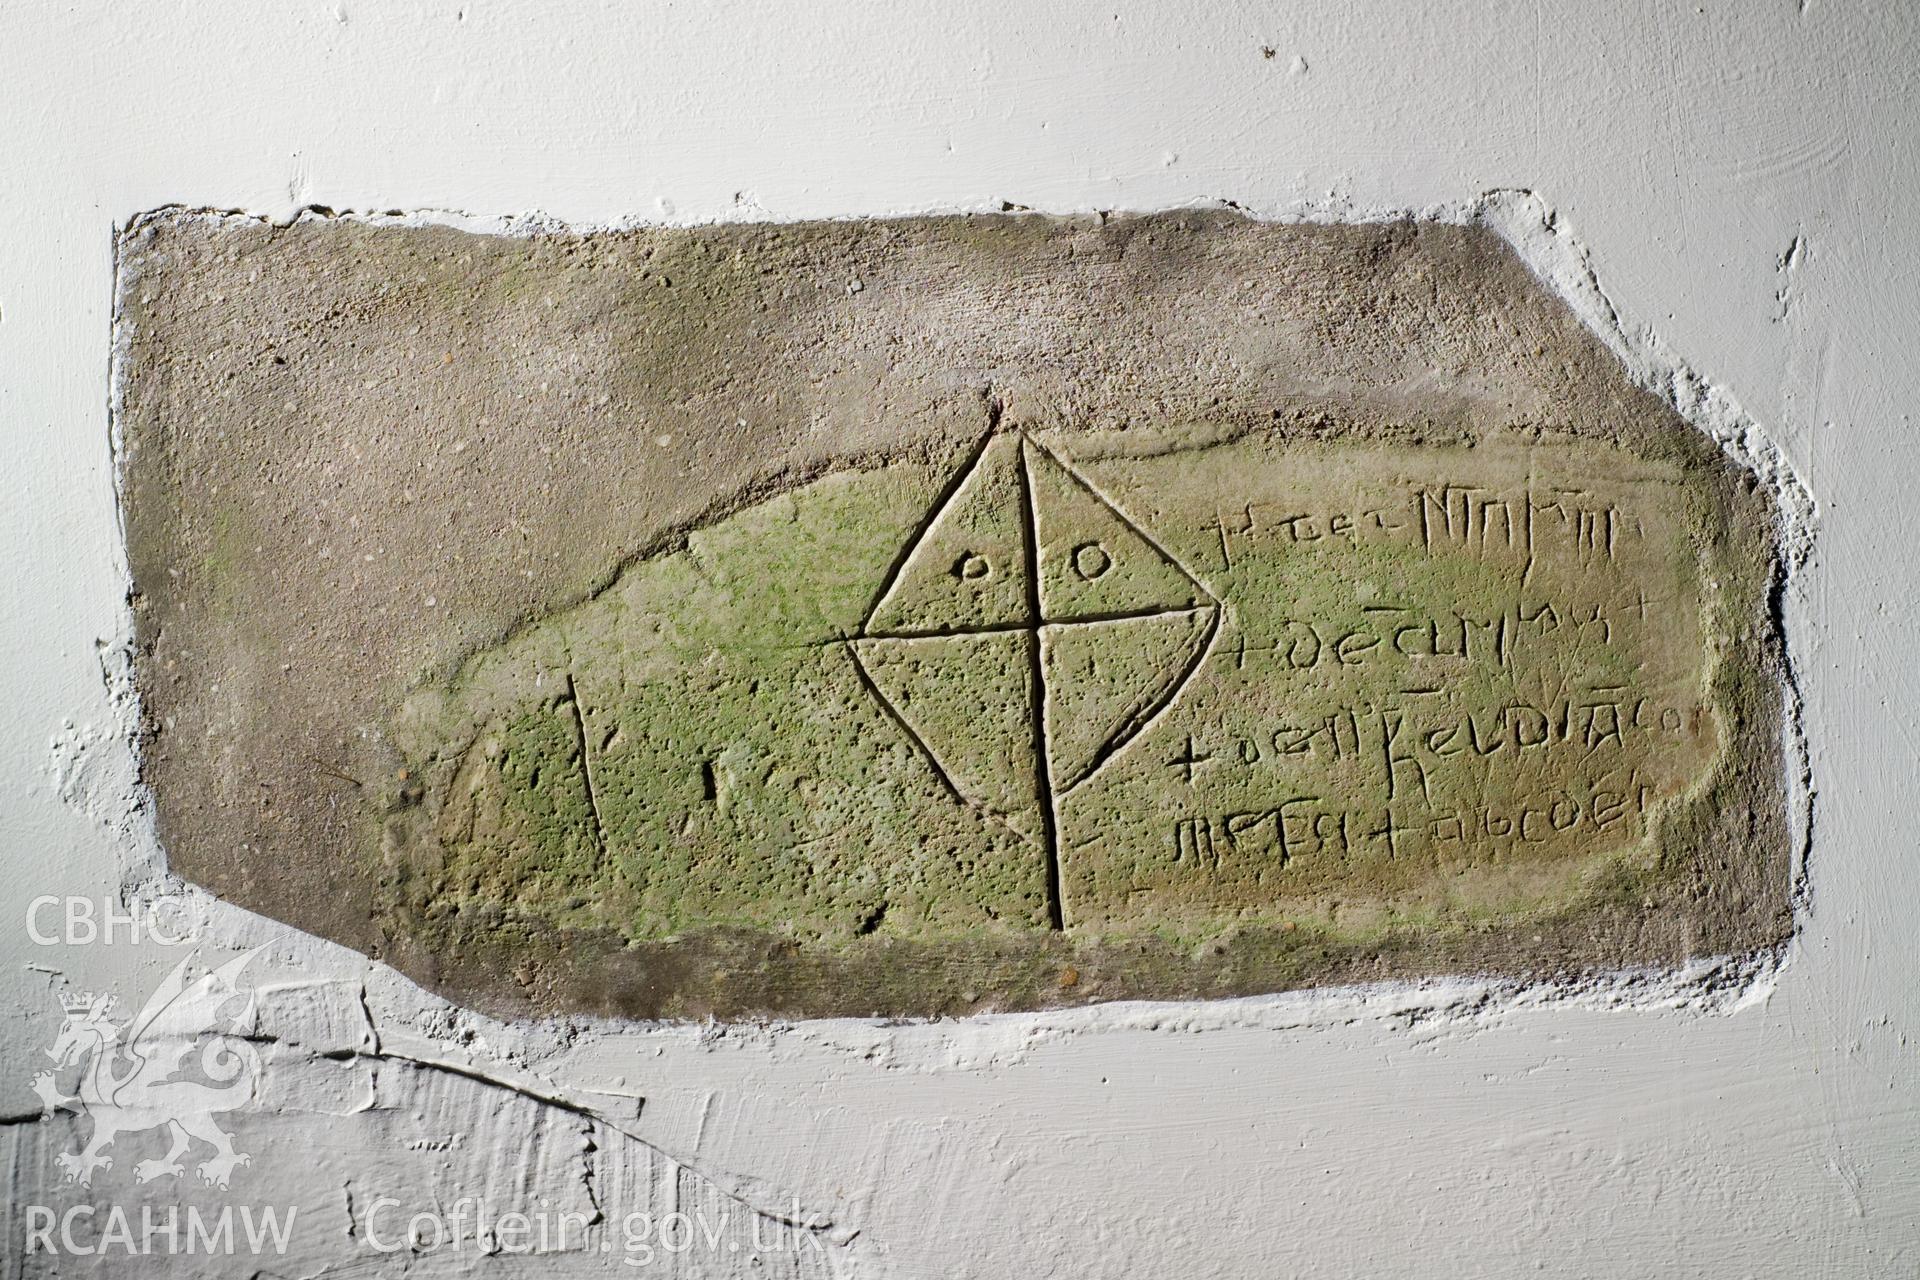 Inscribed stone set in interior north wall